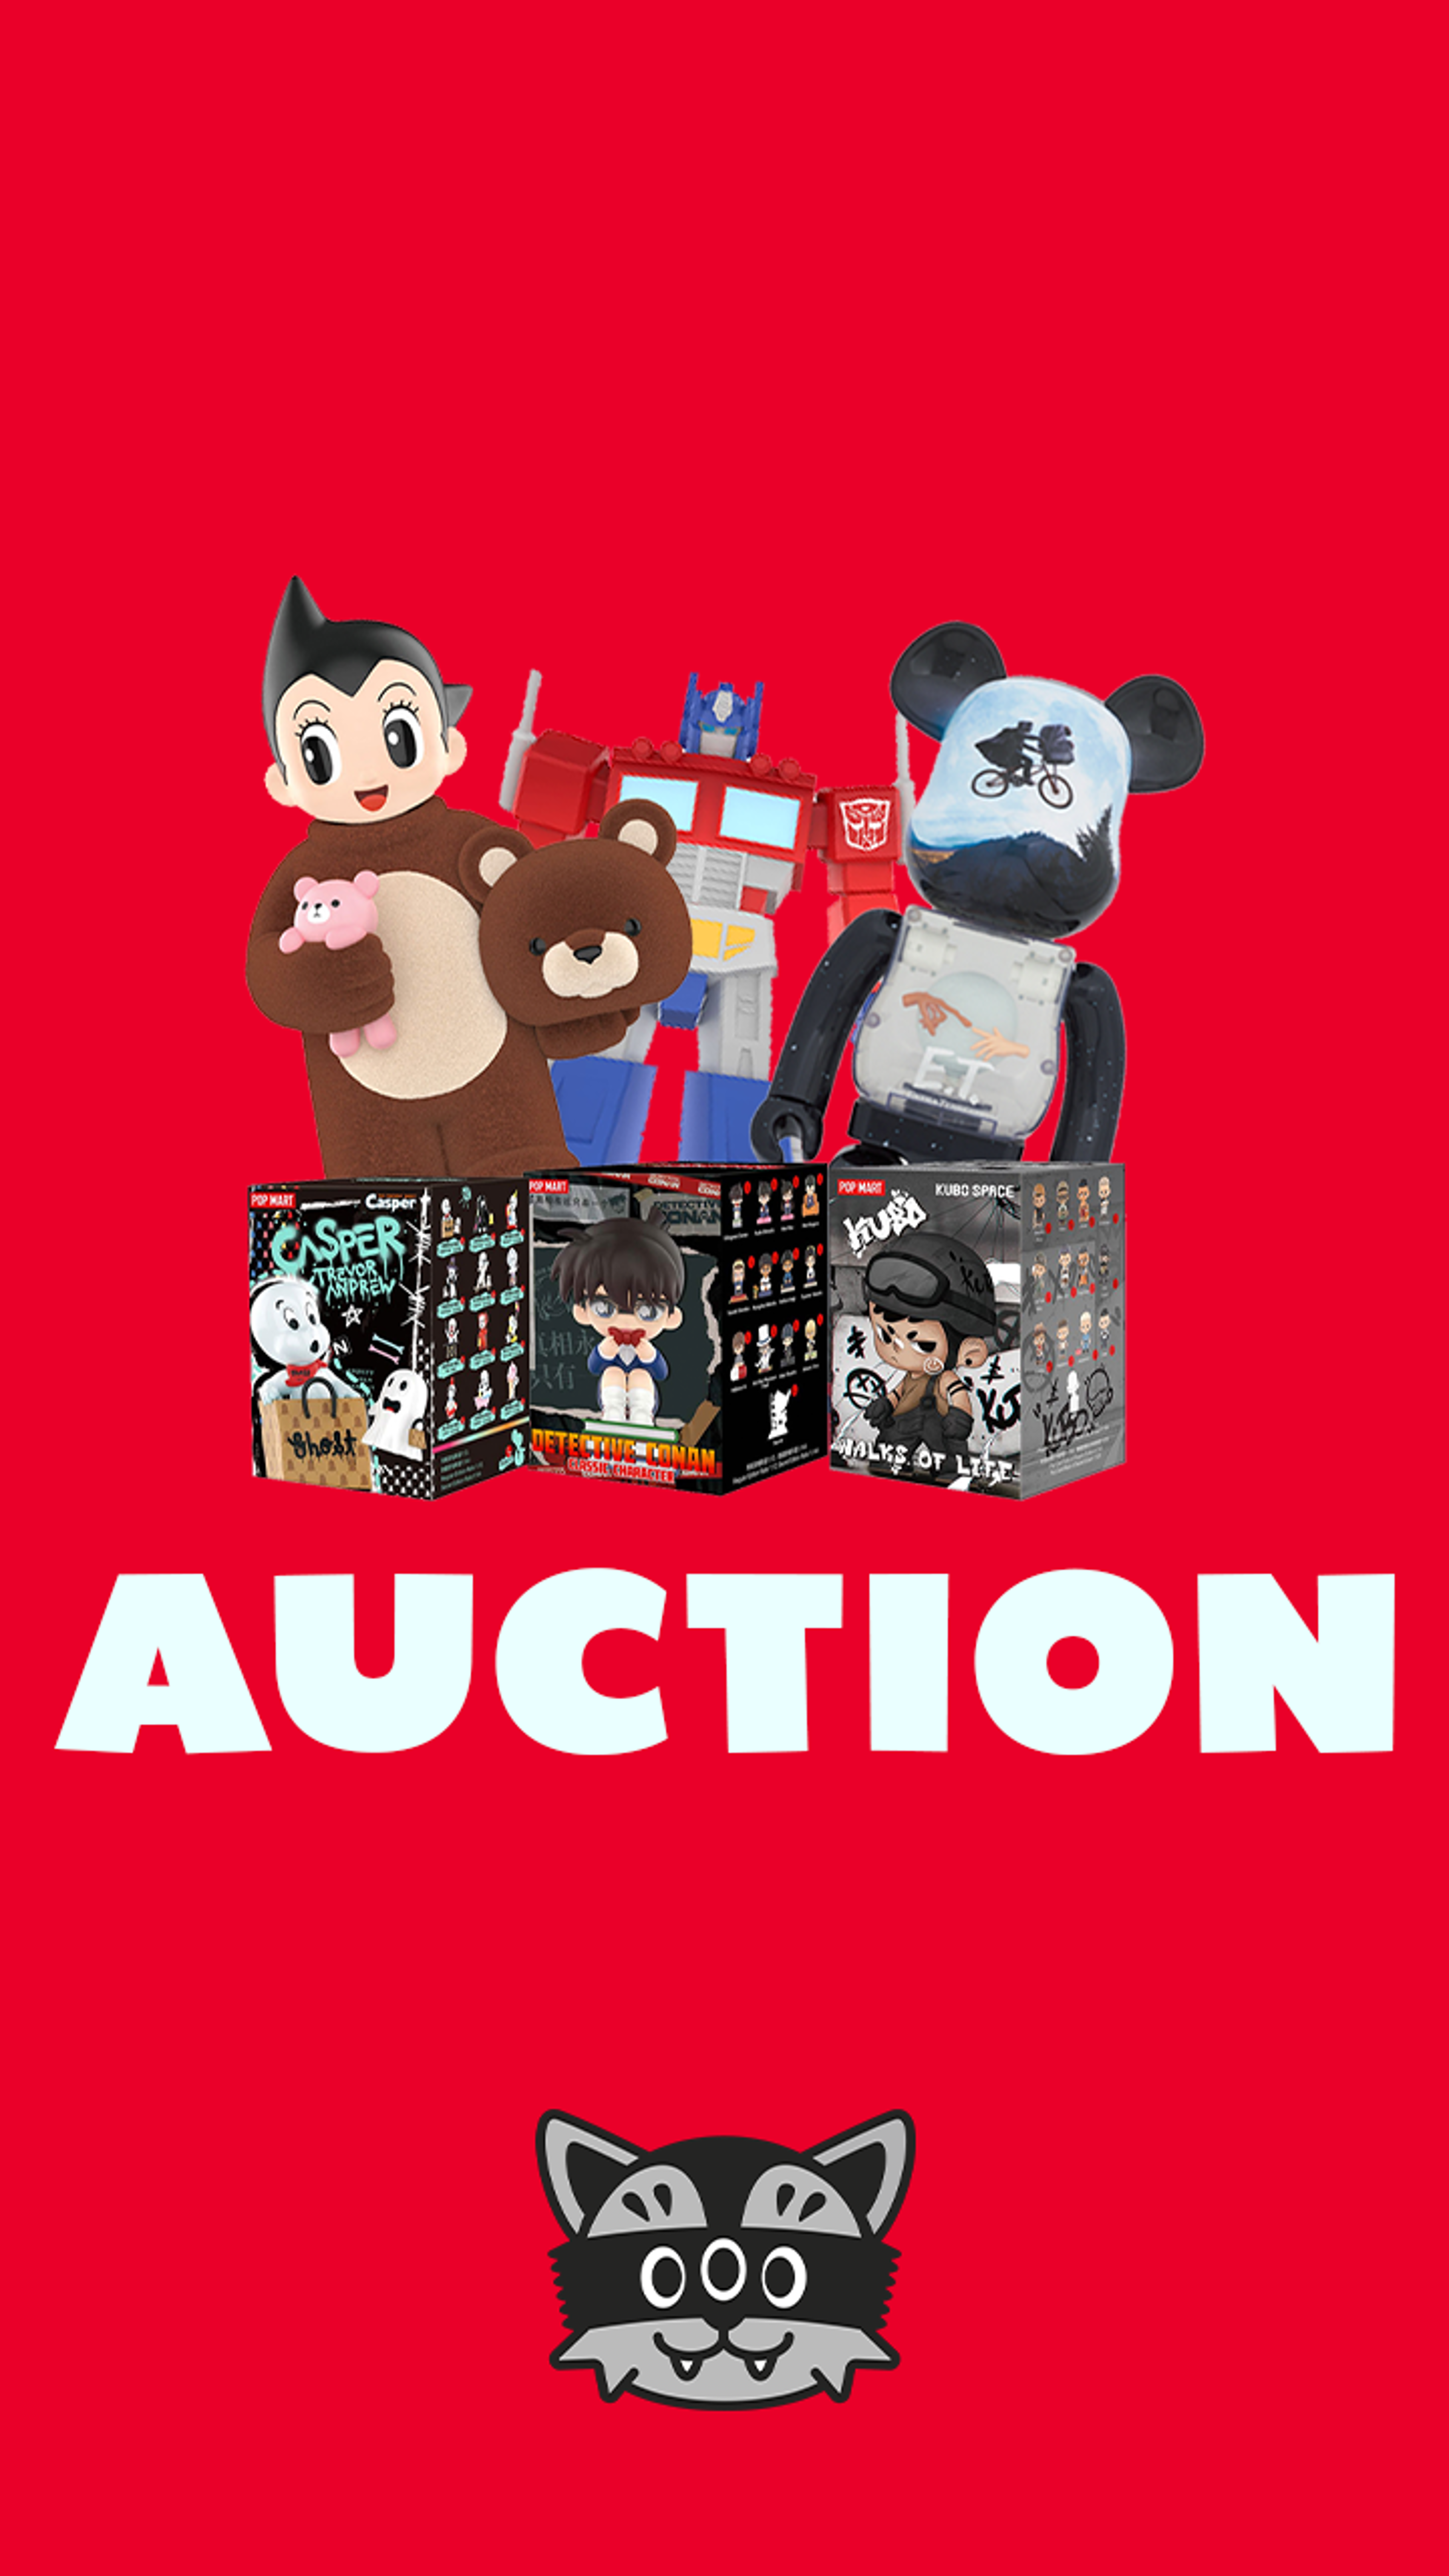 Preview image for the show titled "Mindzai Auction - April 24" at Today @ 5:00 PM